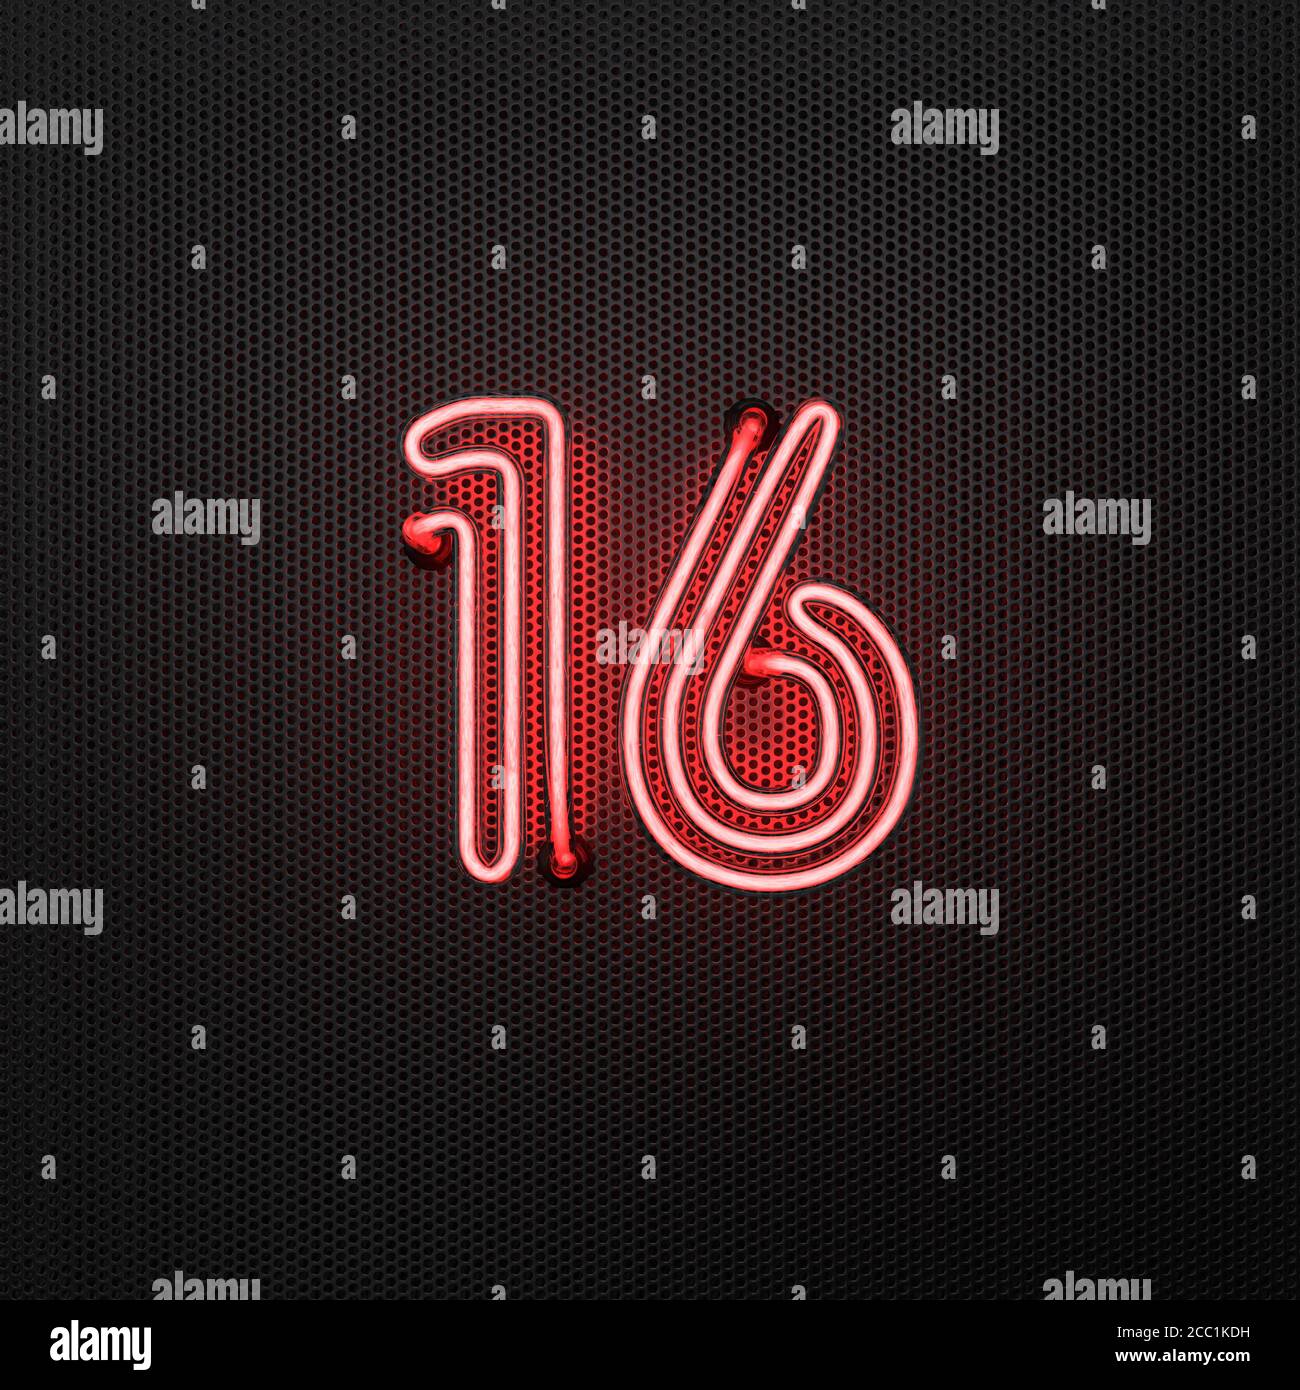 Glowing red neon number 16 (number sixteen) on a perforated metal